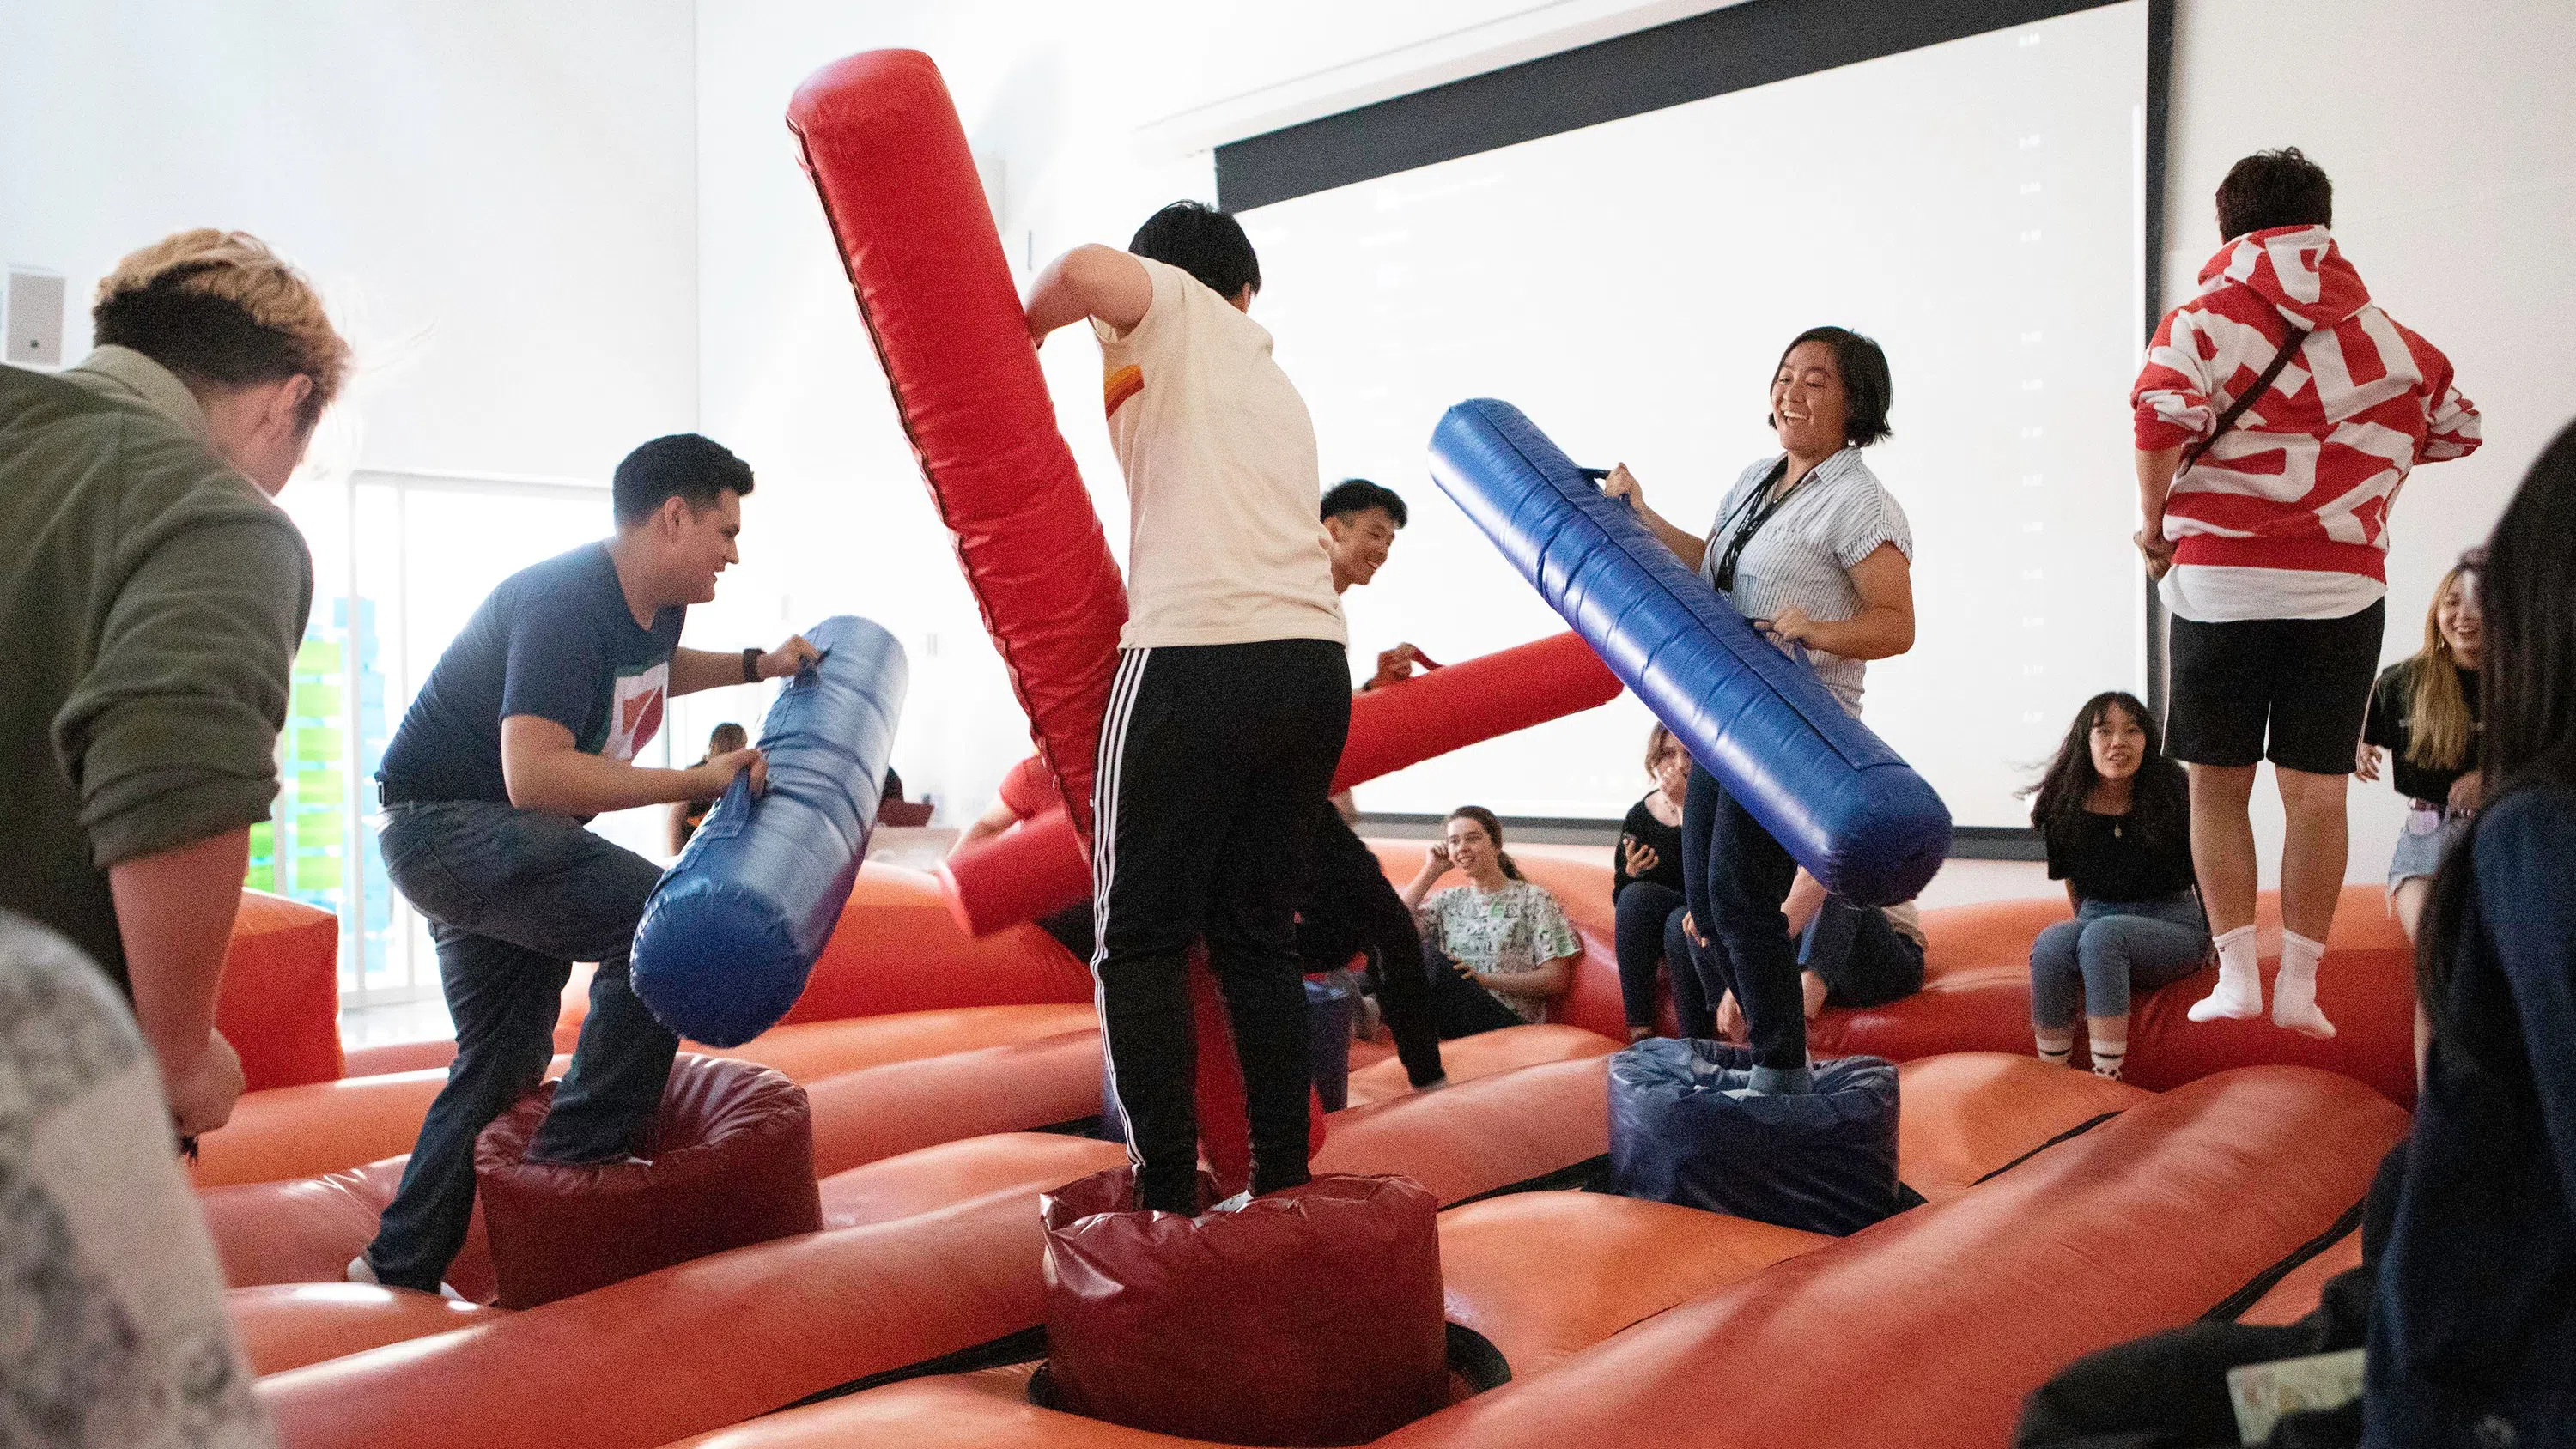 Students play with large inflatable objects in a bouncy-house environment in the Nave.